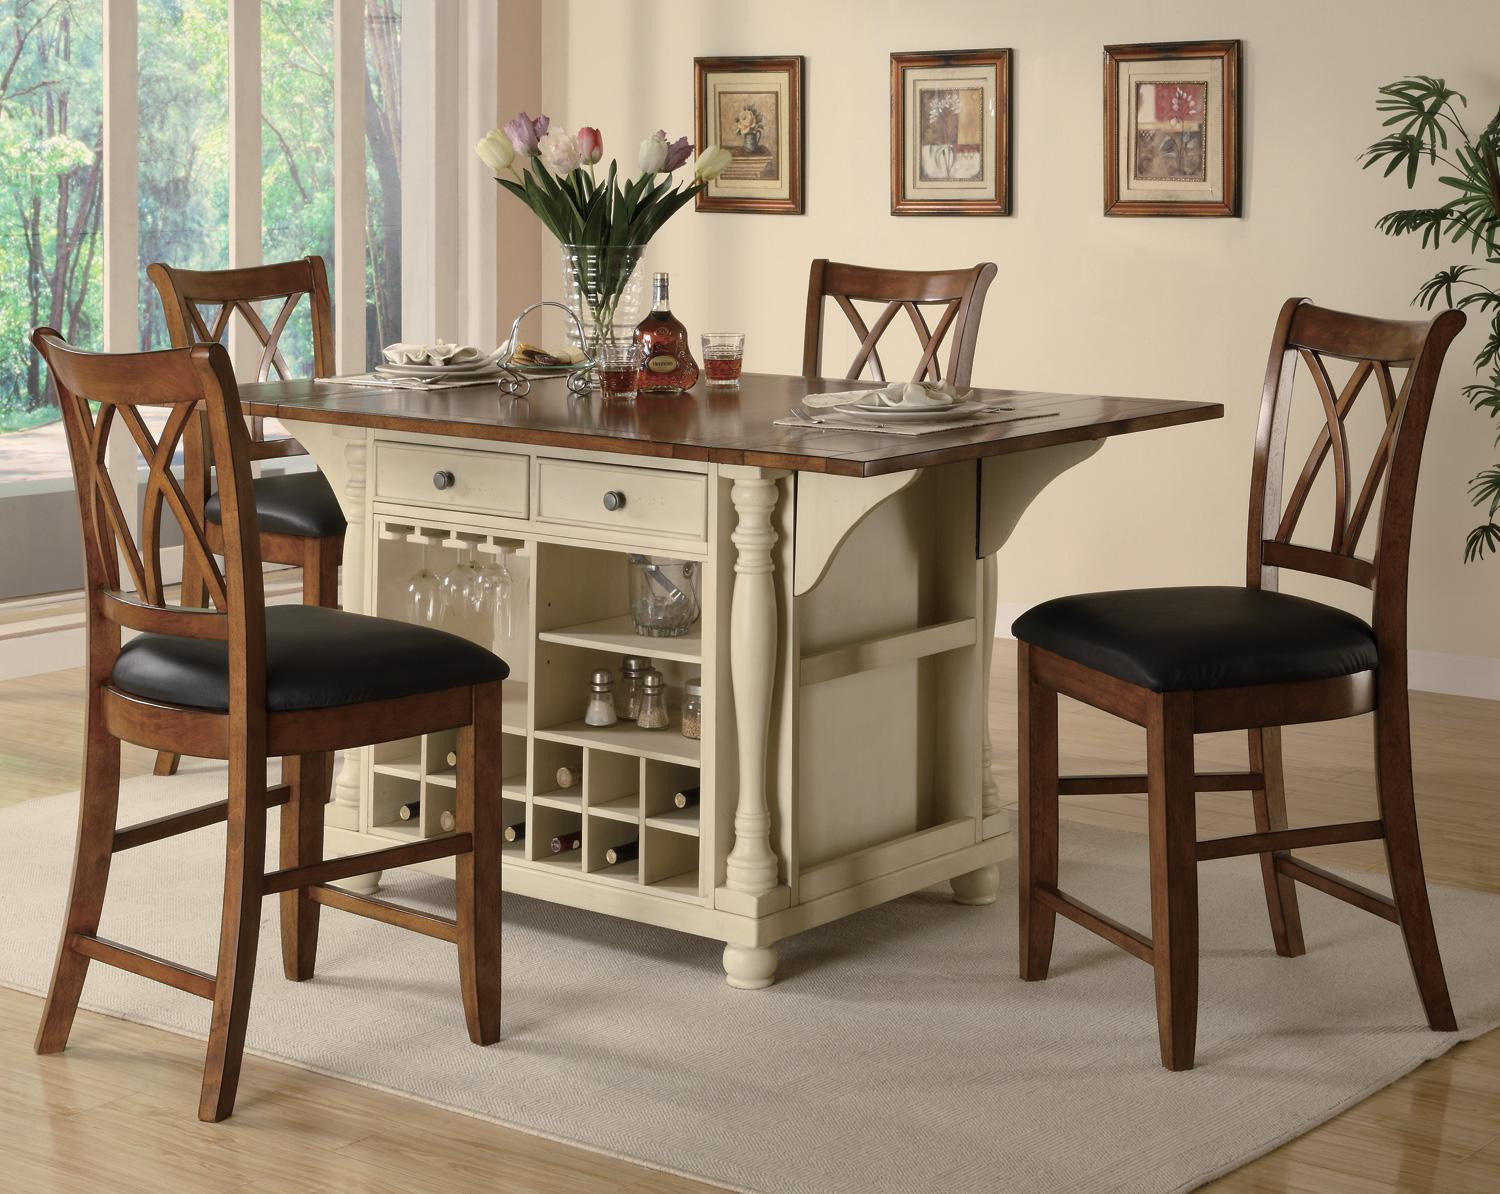 Tall White Kitchen Table
 Counter Height Kitchen Tables for Special Dining Room